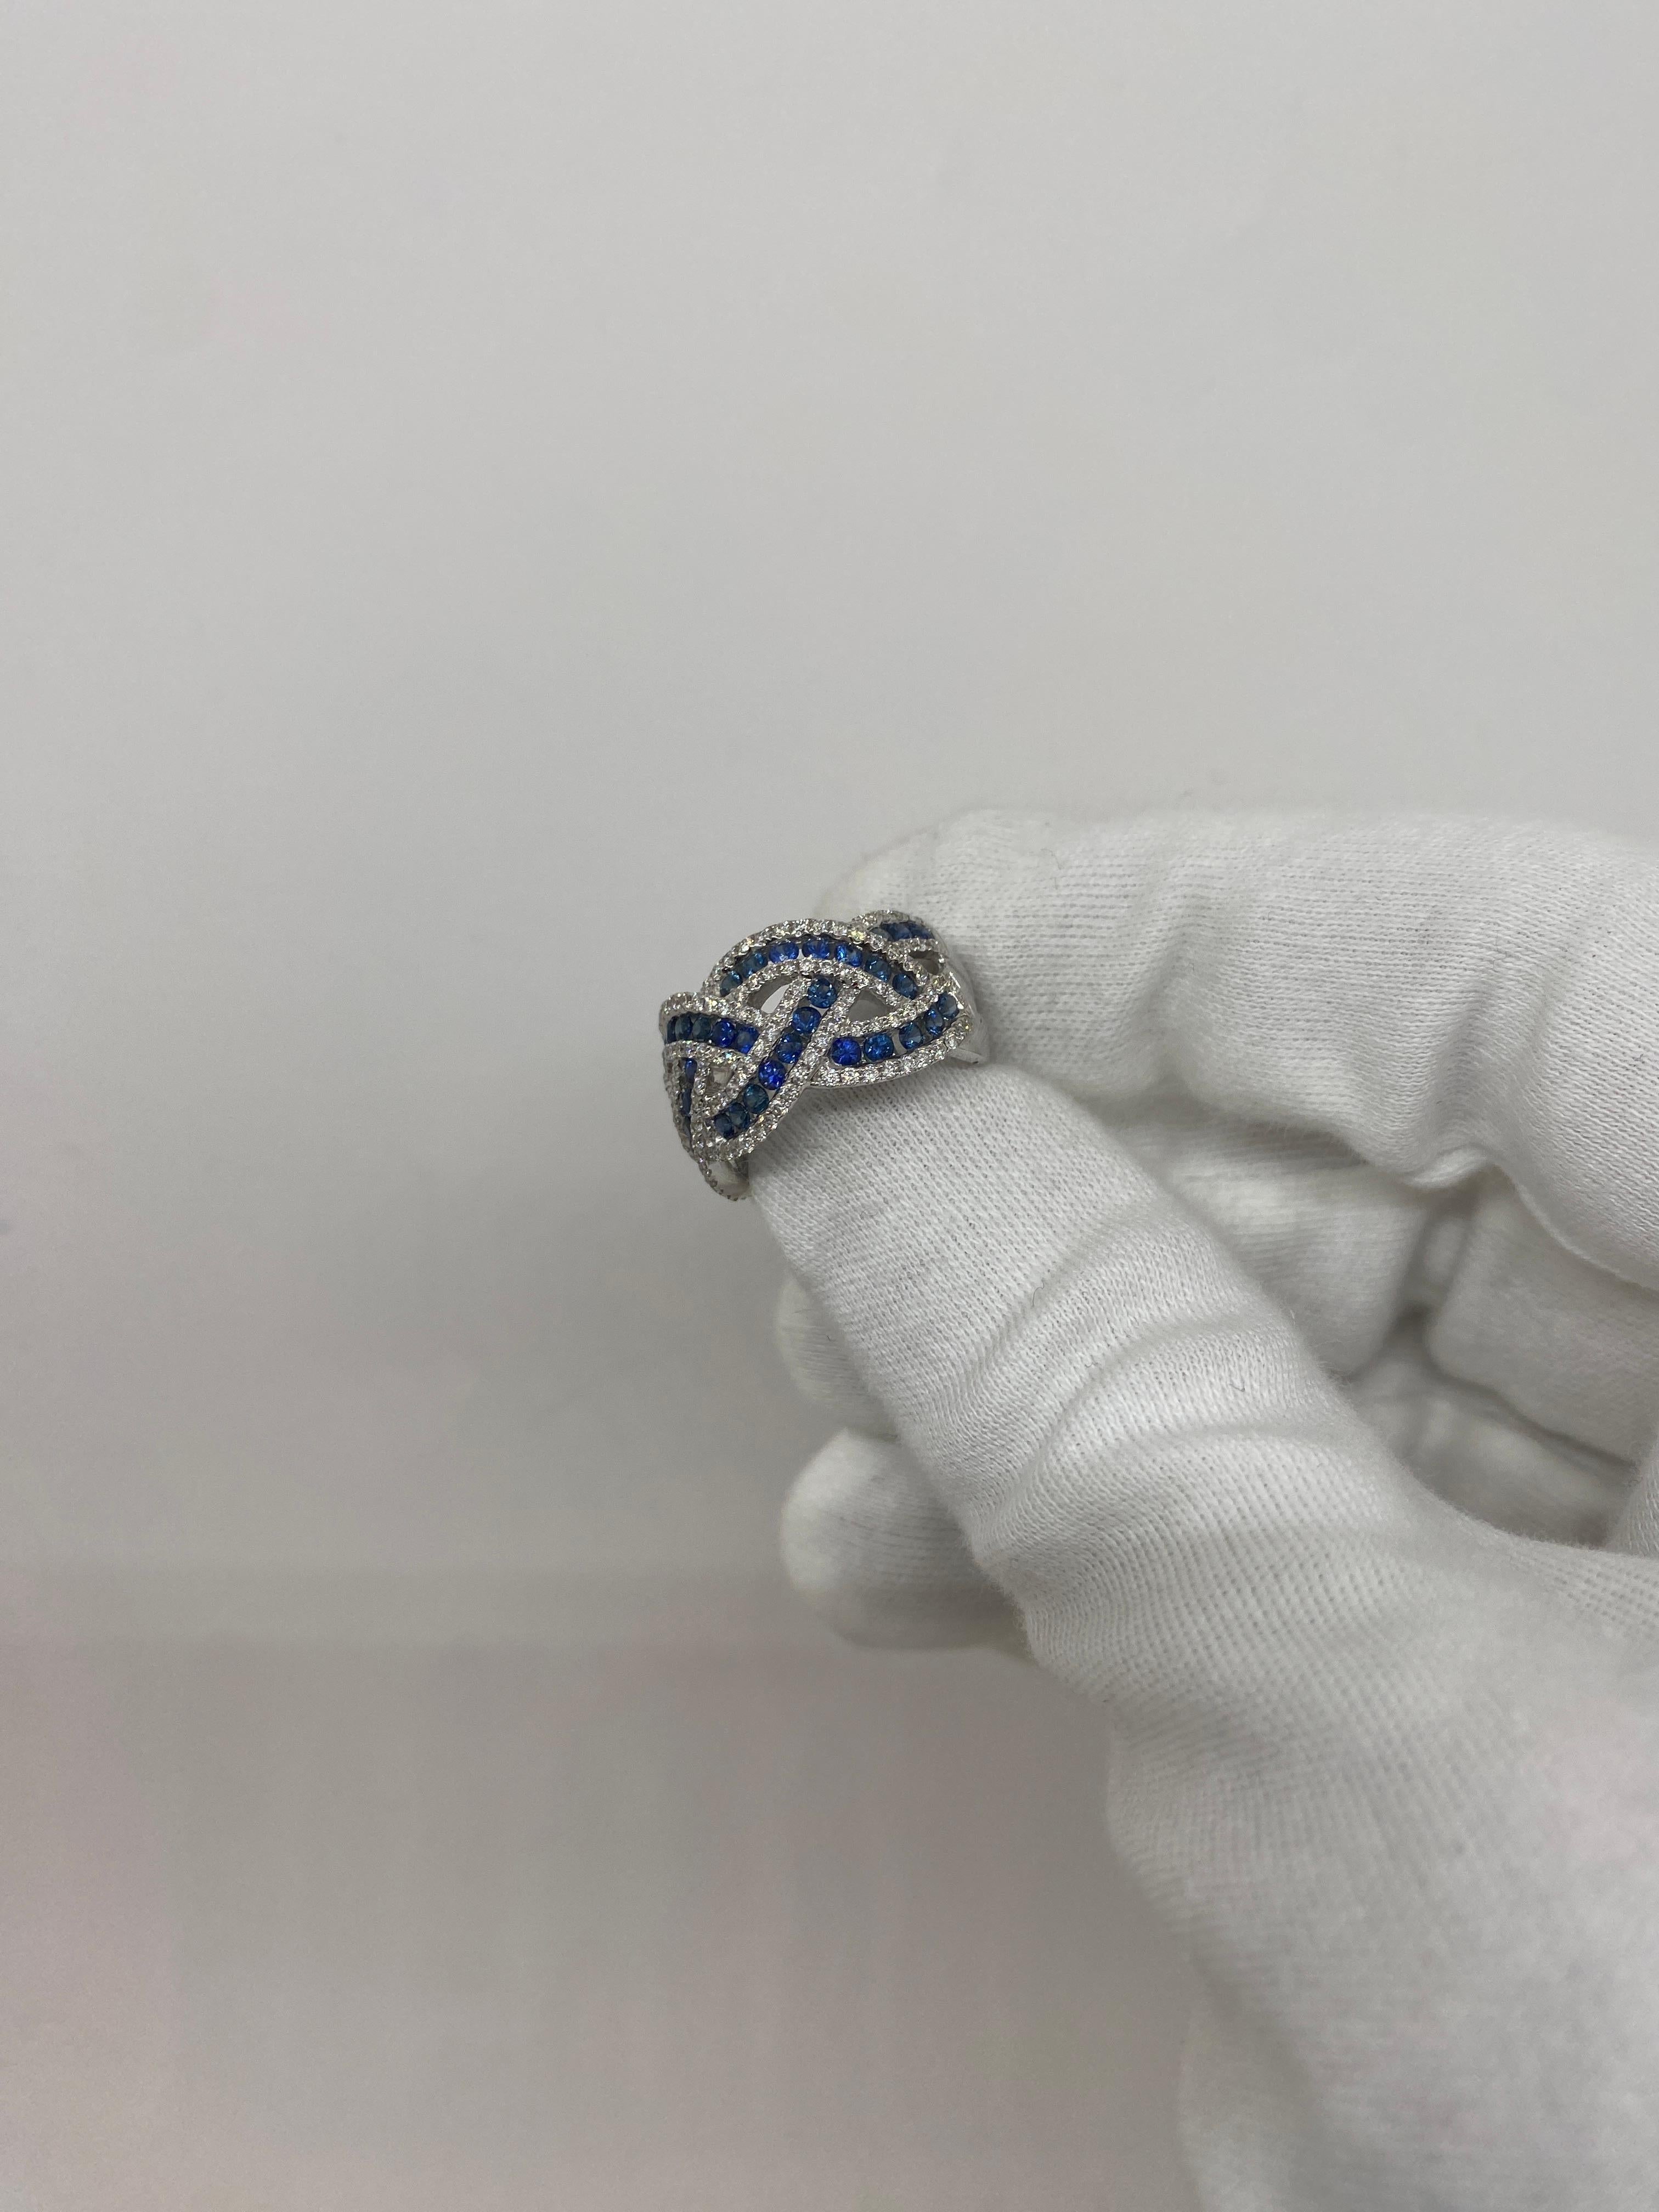 Brilliant Cut 18kt White Gold Band Ring White Diamonds 1.07 Ct Blue Sapphires 1.73 Ct For Sale